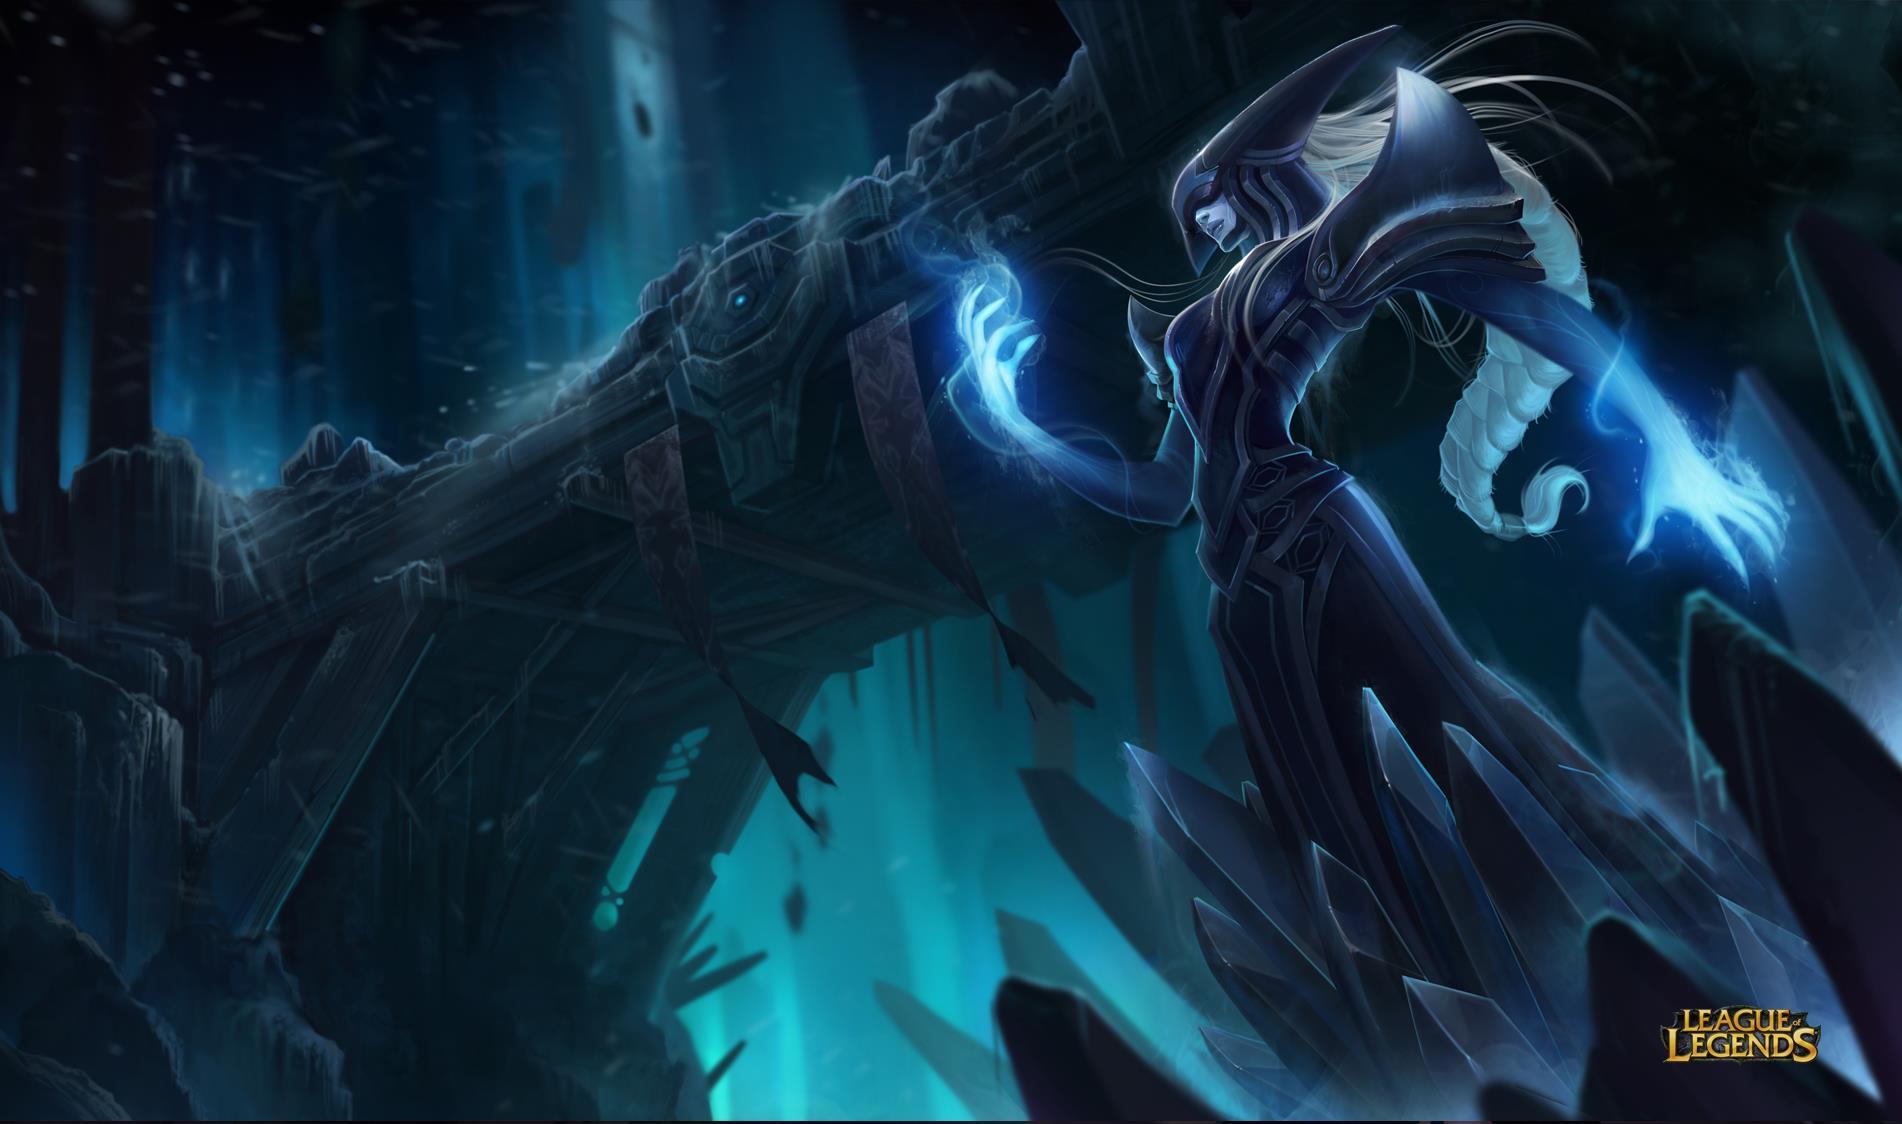 Lissandra Wallpapers Top Free Lissandra Backgrounds Images, Photos, Reviews